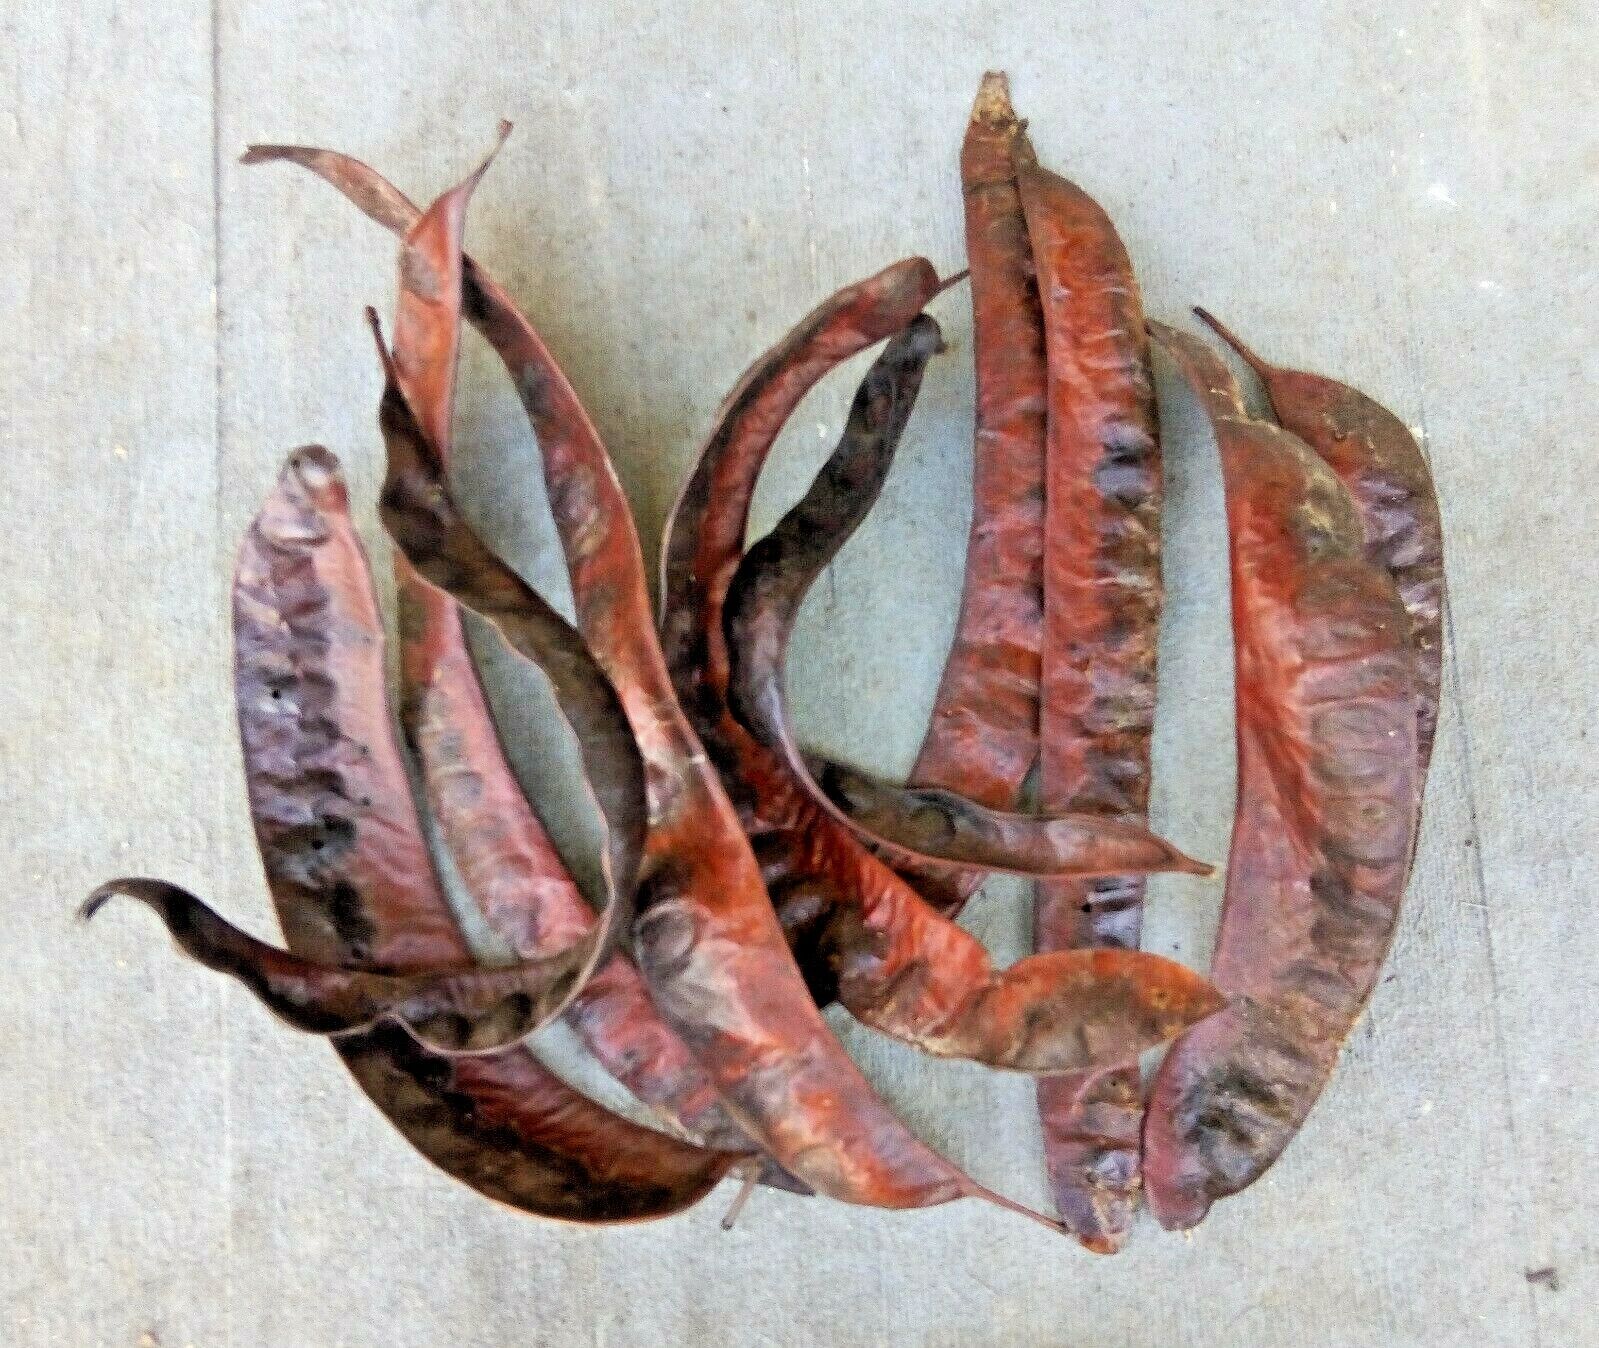 10 Locust Tree Seed Pods Long Red Brown Black Crafts Wedding Fall Rustic Decor